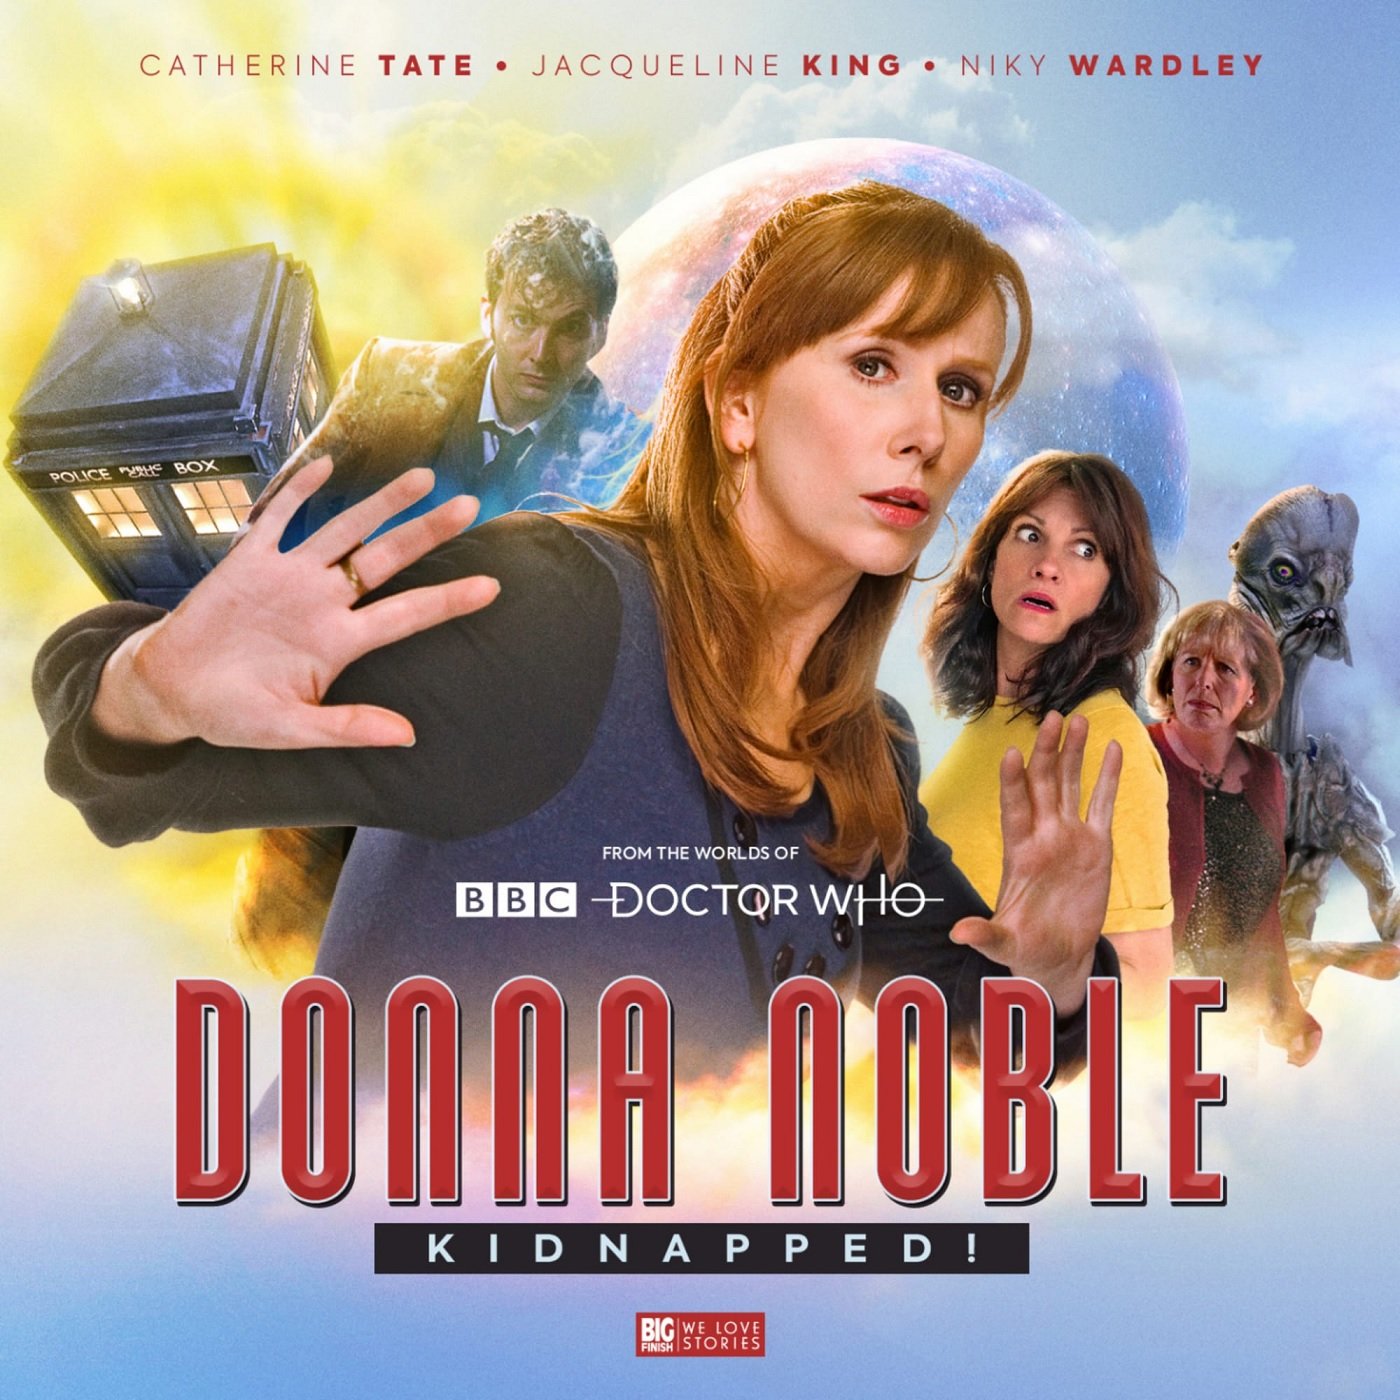 Reviewed: Big Finish’s Donna Noble – Kidnapped!